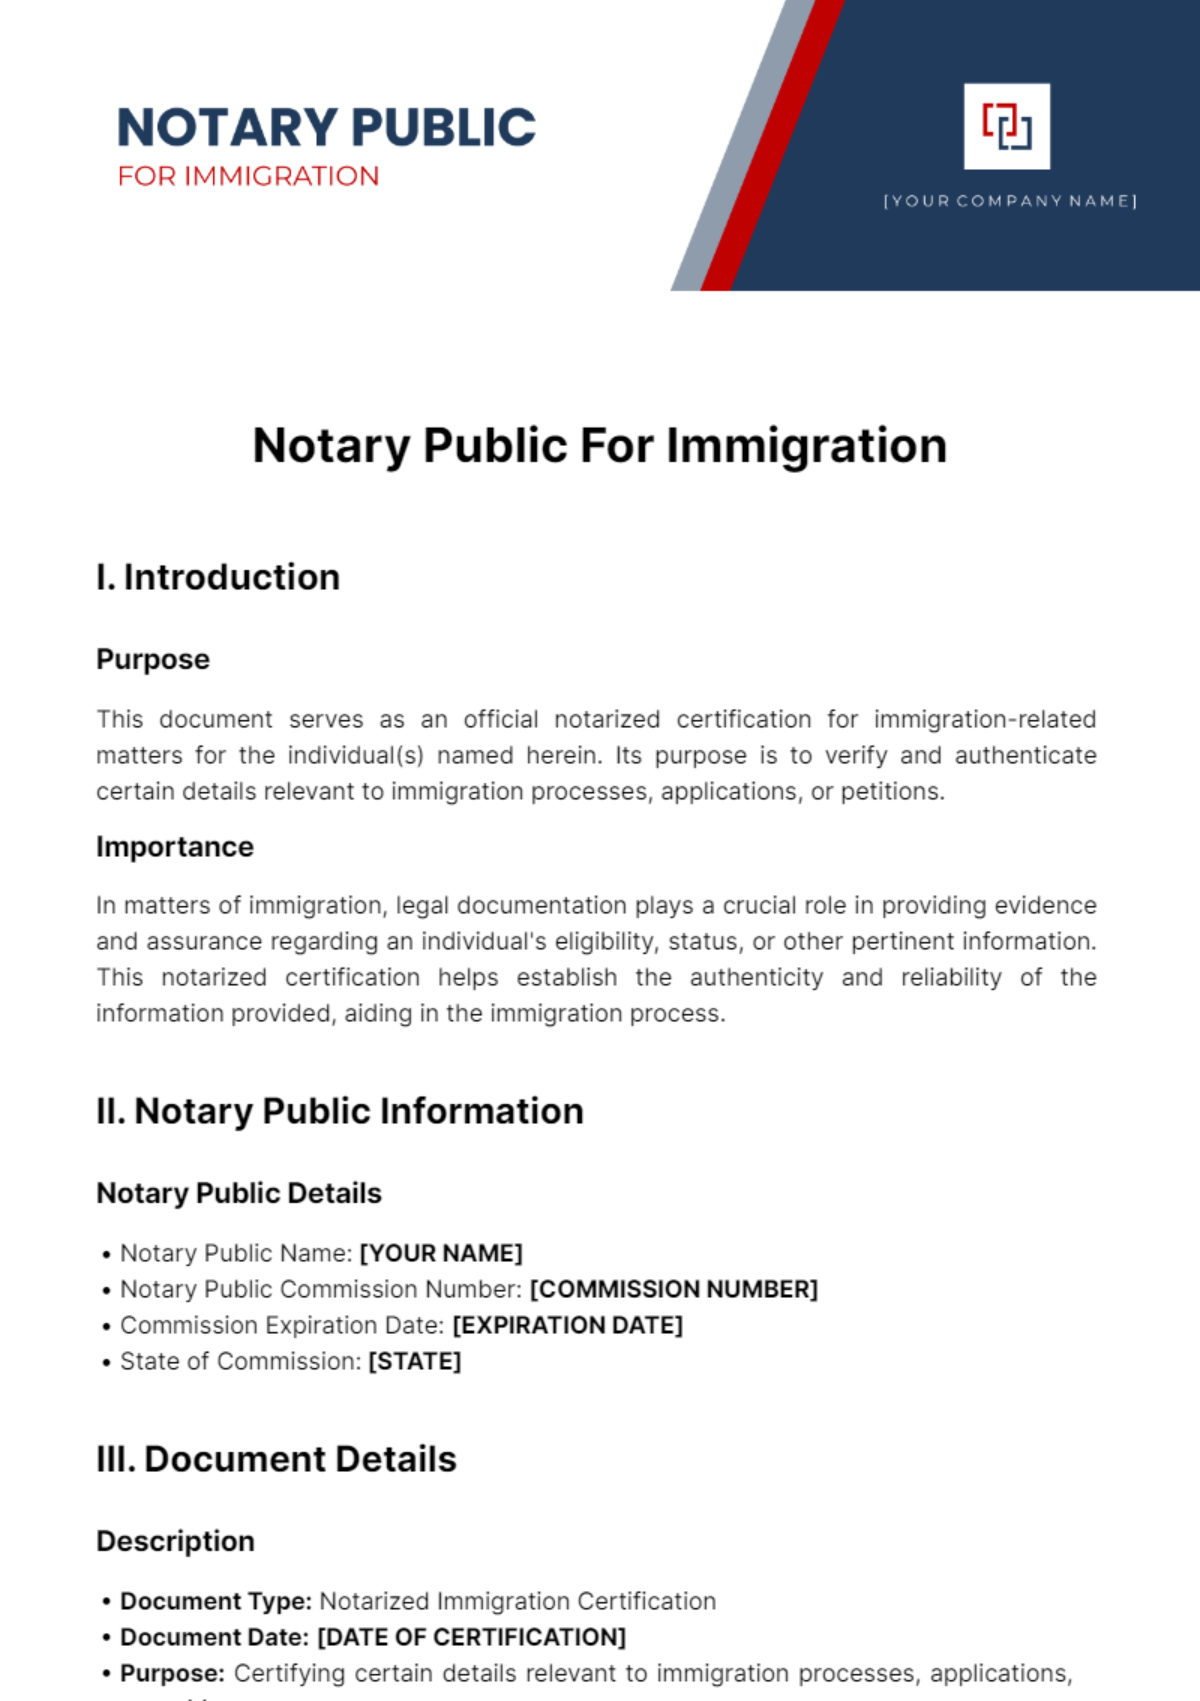 Notary Public For Immigration Template